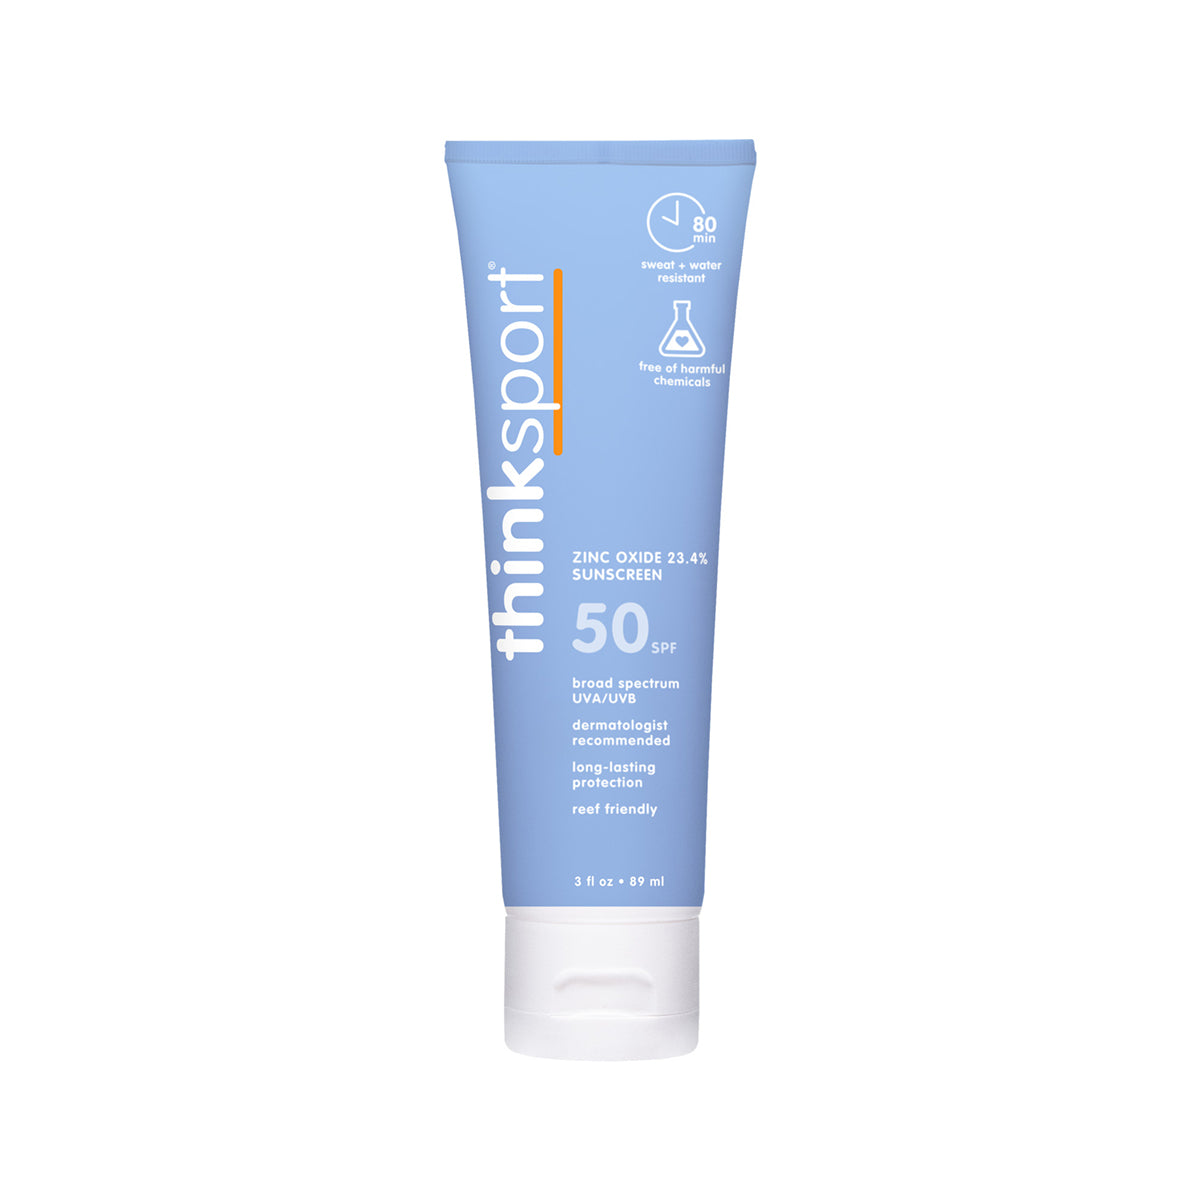 Tube of ThinkSport SPF 50 sunscreen featuring its zinc oxide formula, broad spectrum UVA/UVB protection, and suitability for a range of activities